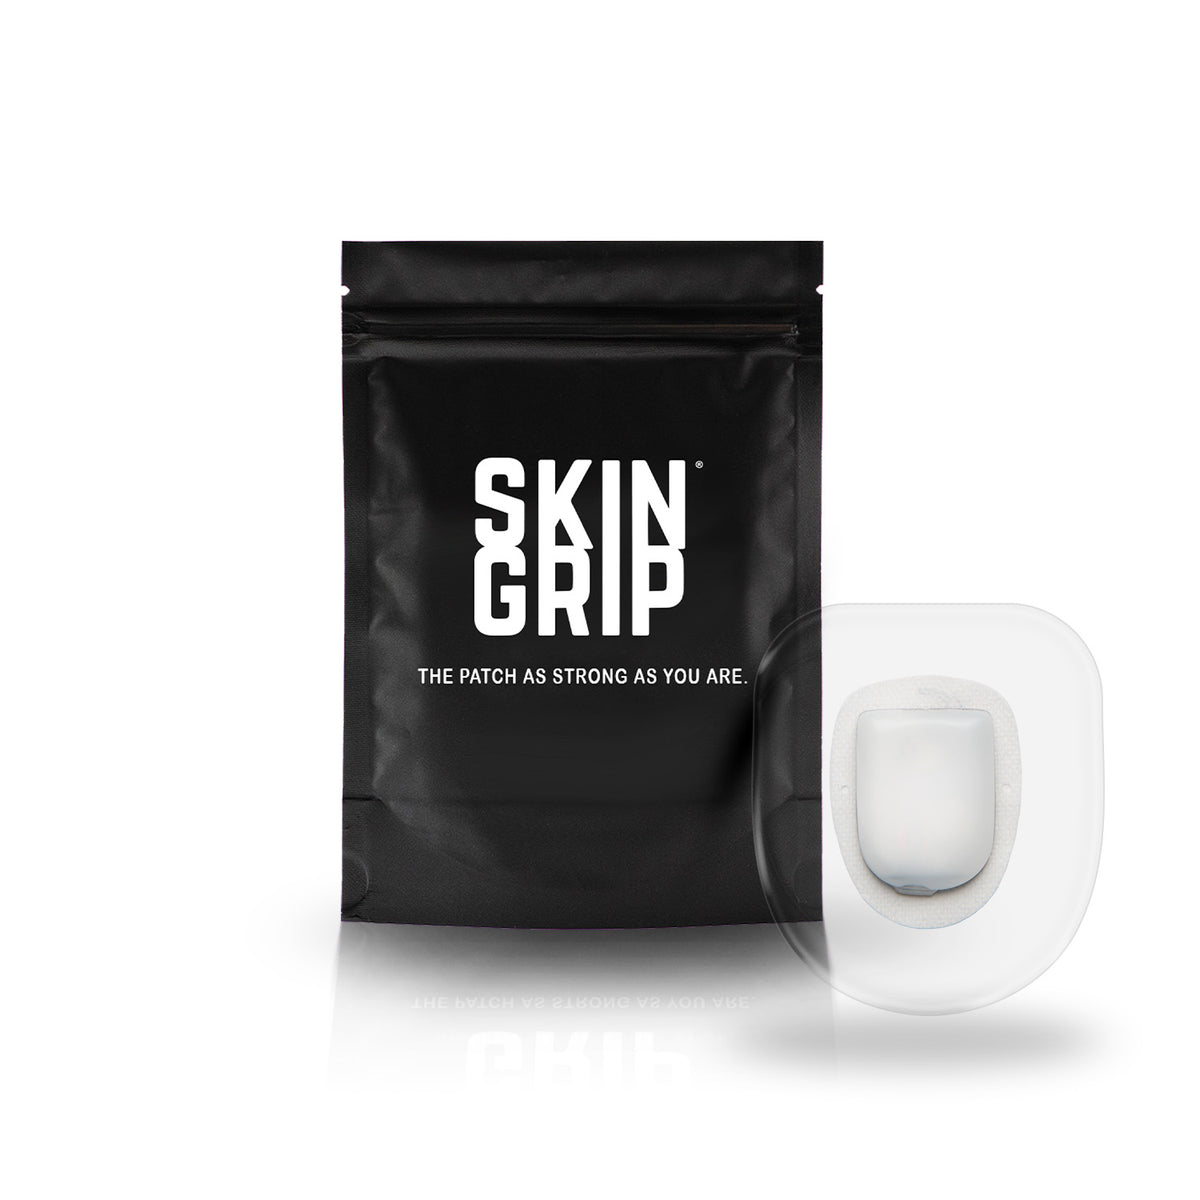 Skin Grip Original - Omnipod Adhesive Patches - 20 Pack